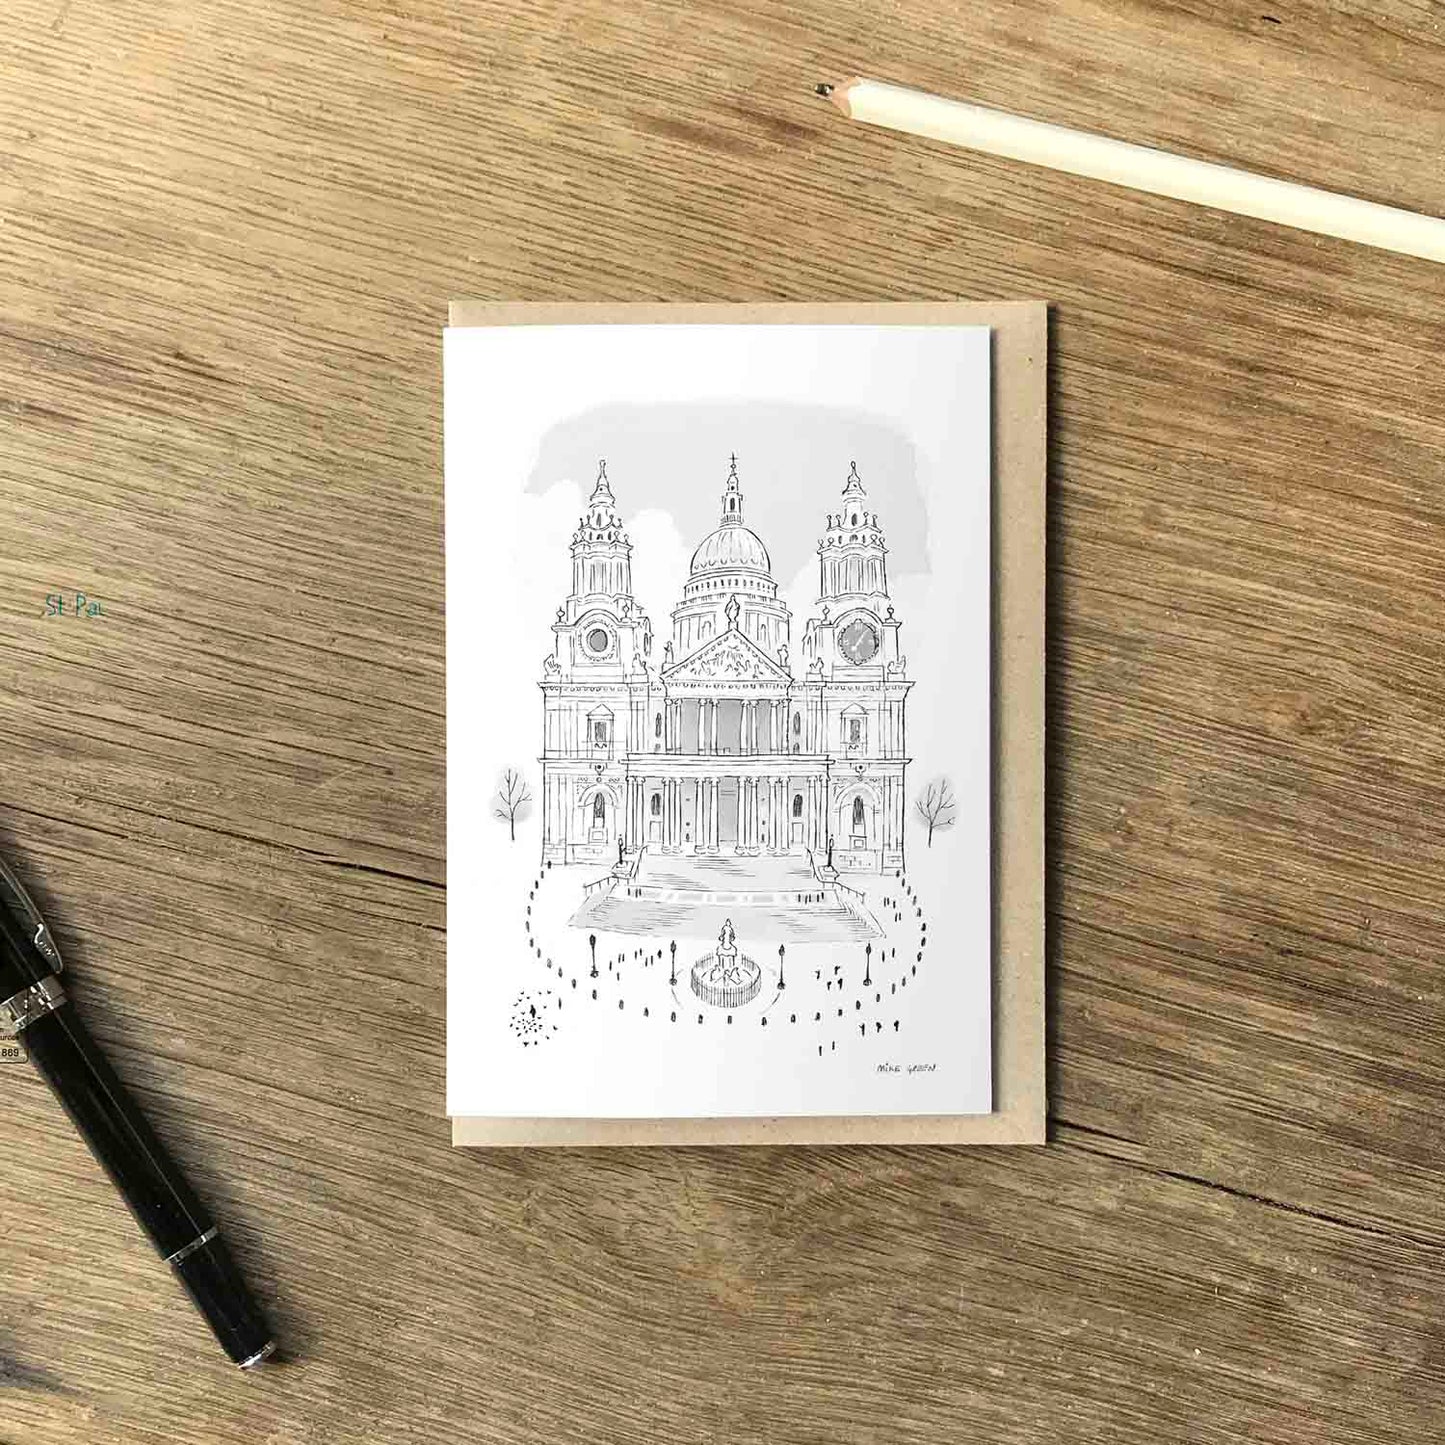 London's St Paul's Cathedral beautifully sketched on a greeting card from mike green illustration.